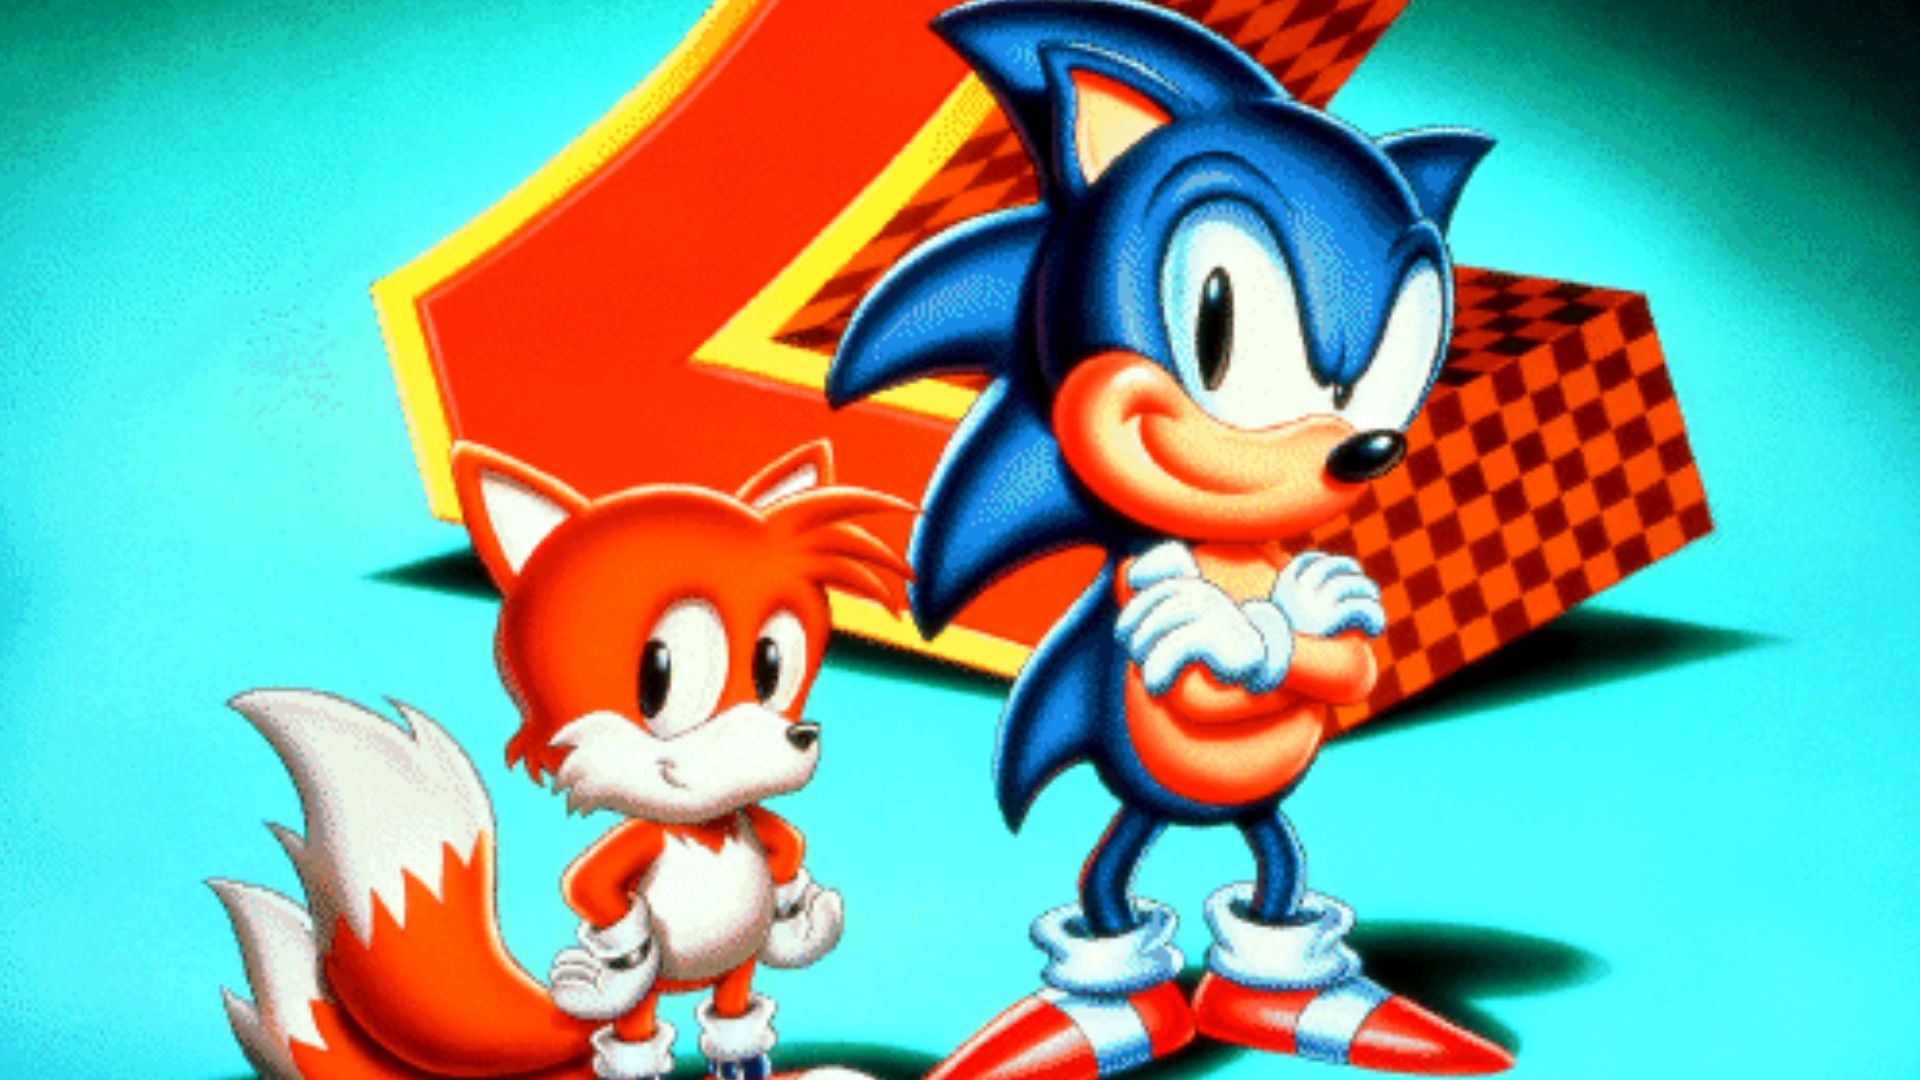 Sonic and Tails in art for Sonic 2.